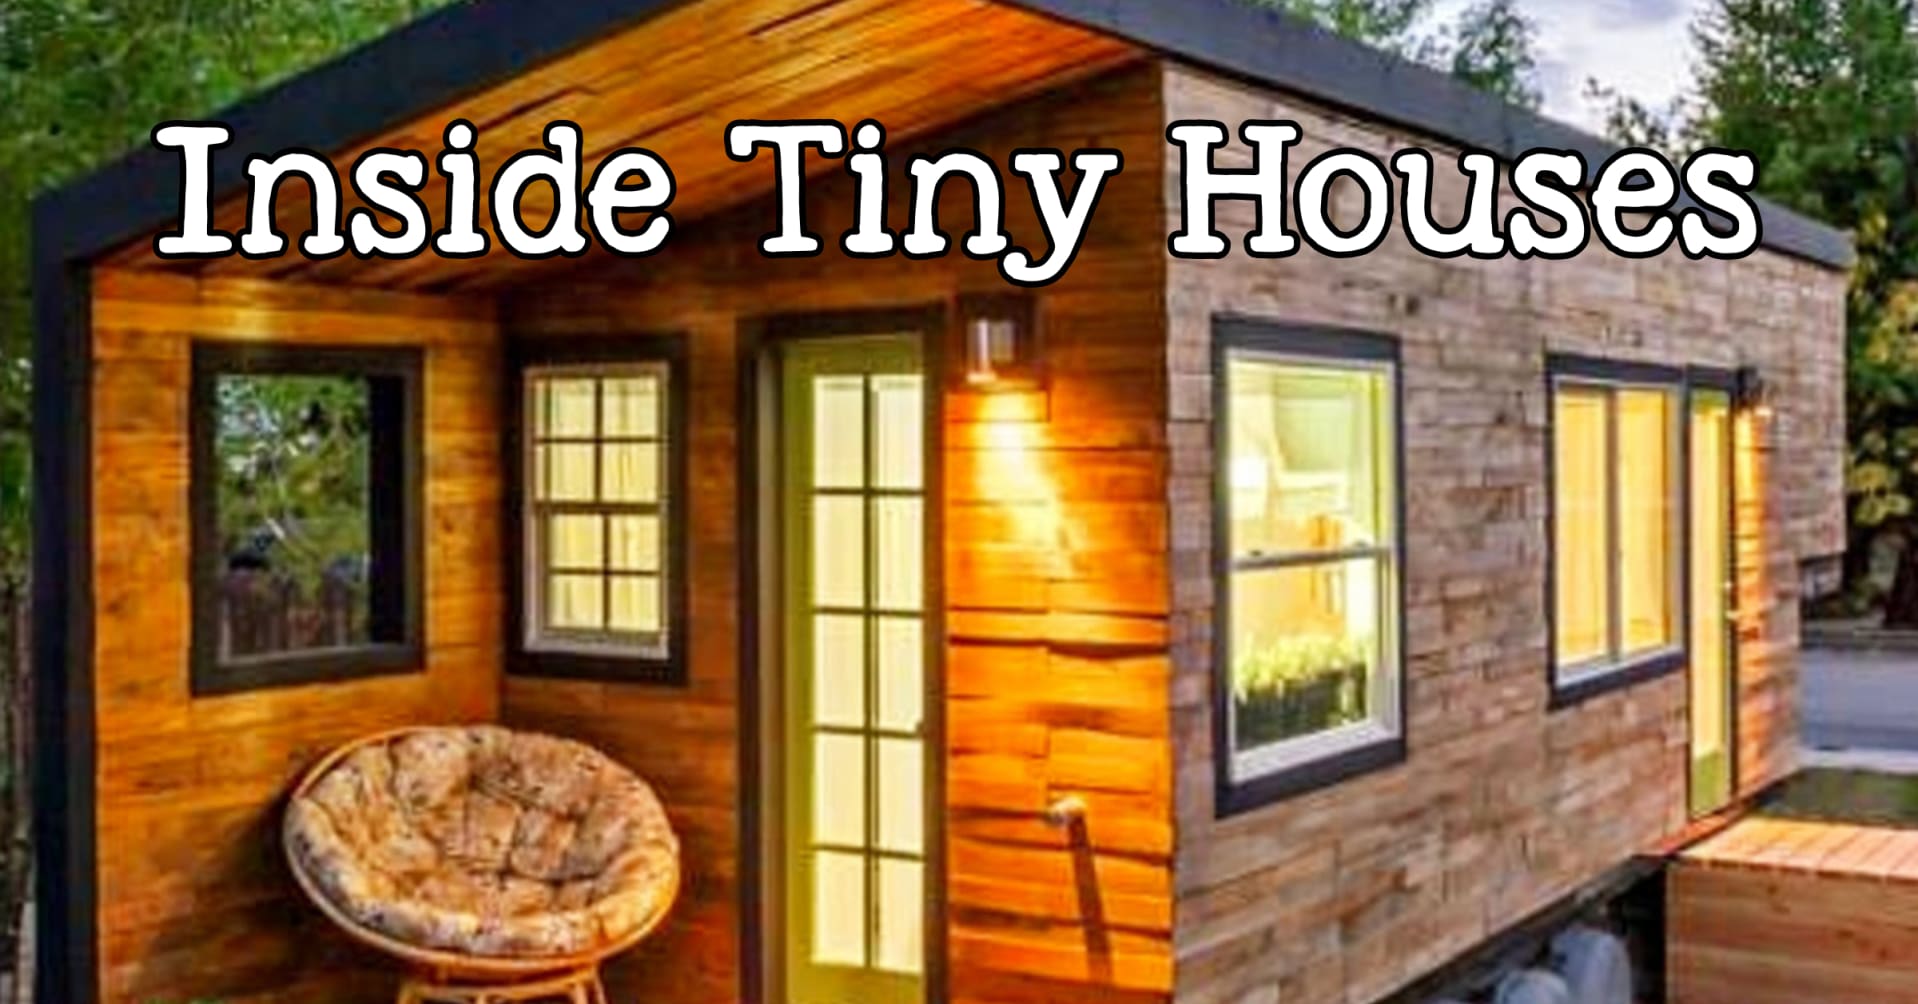 Tiny houses! Love HGTV Tiny Homes? Take a look inside tiny houses in these tiny house interior photos and images (interior AND exterior) These tiny house designs and floor plans are perfect tiny house plans under 1000 sq ft - they're like a tiny apartment on wheels for tiny home communities!